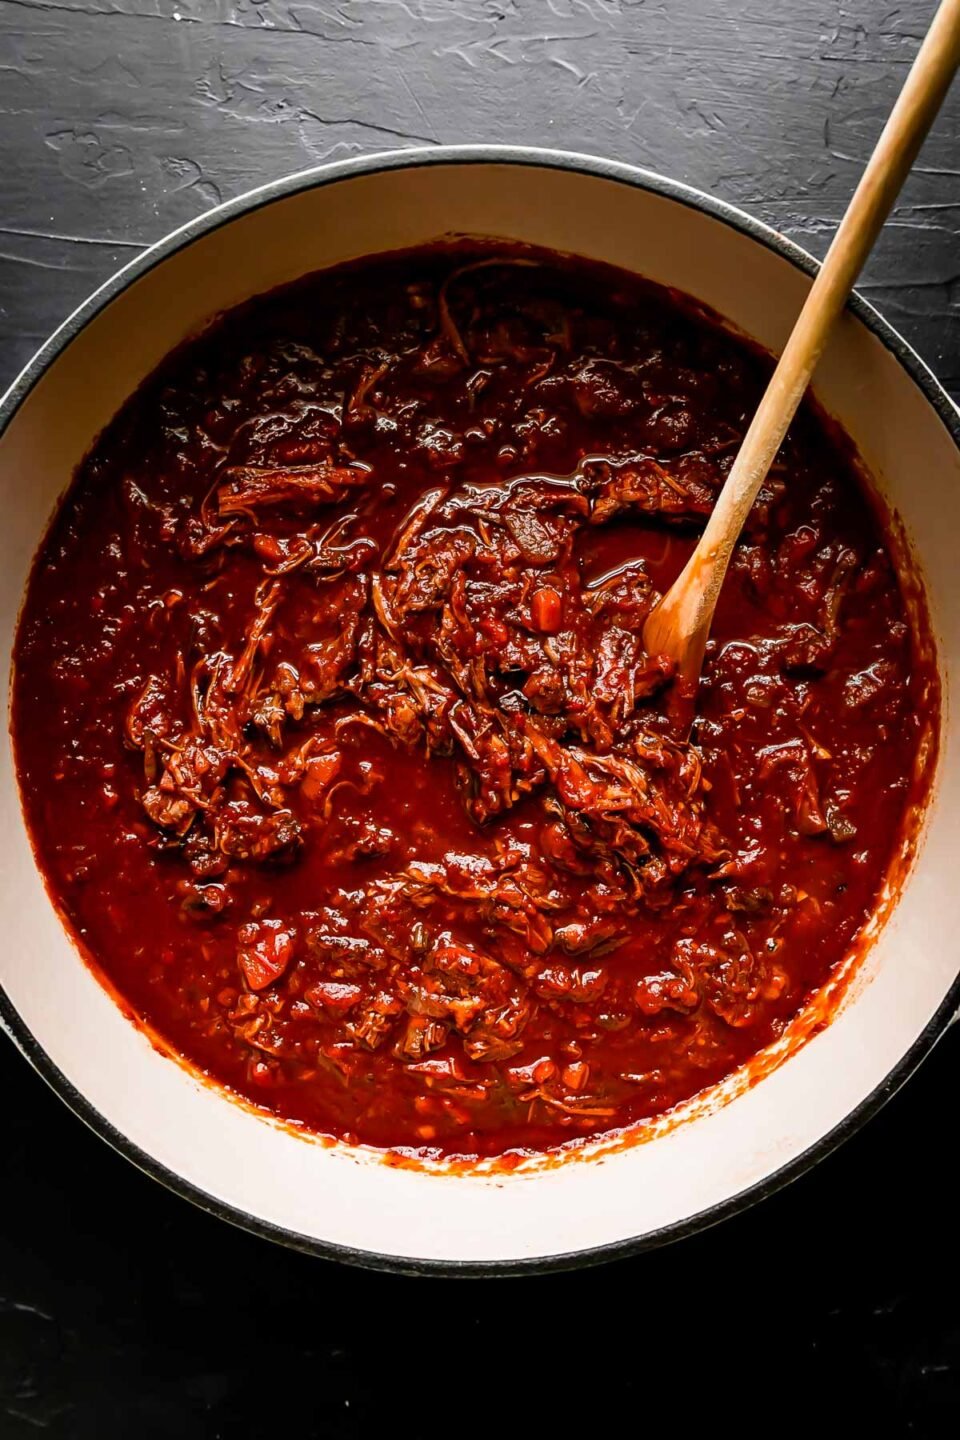 Beef ragu sauce fills a large white pot that sits atop a black textured surface. A wooden spoon rests inside of the pot for stirring the beef ragu recipe.